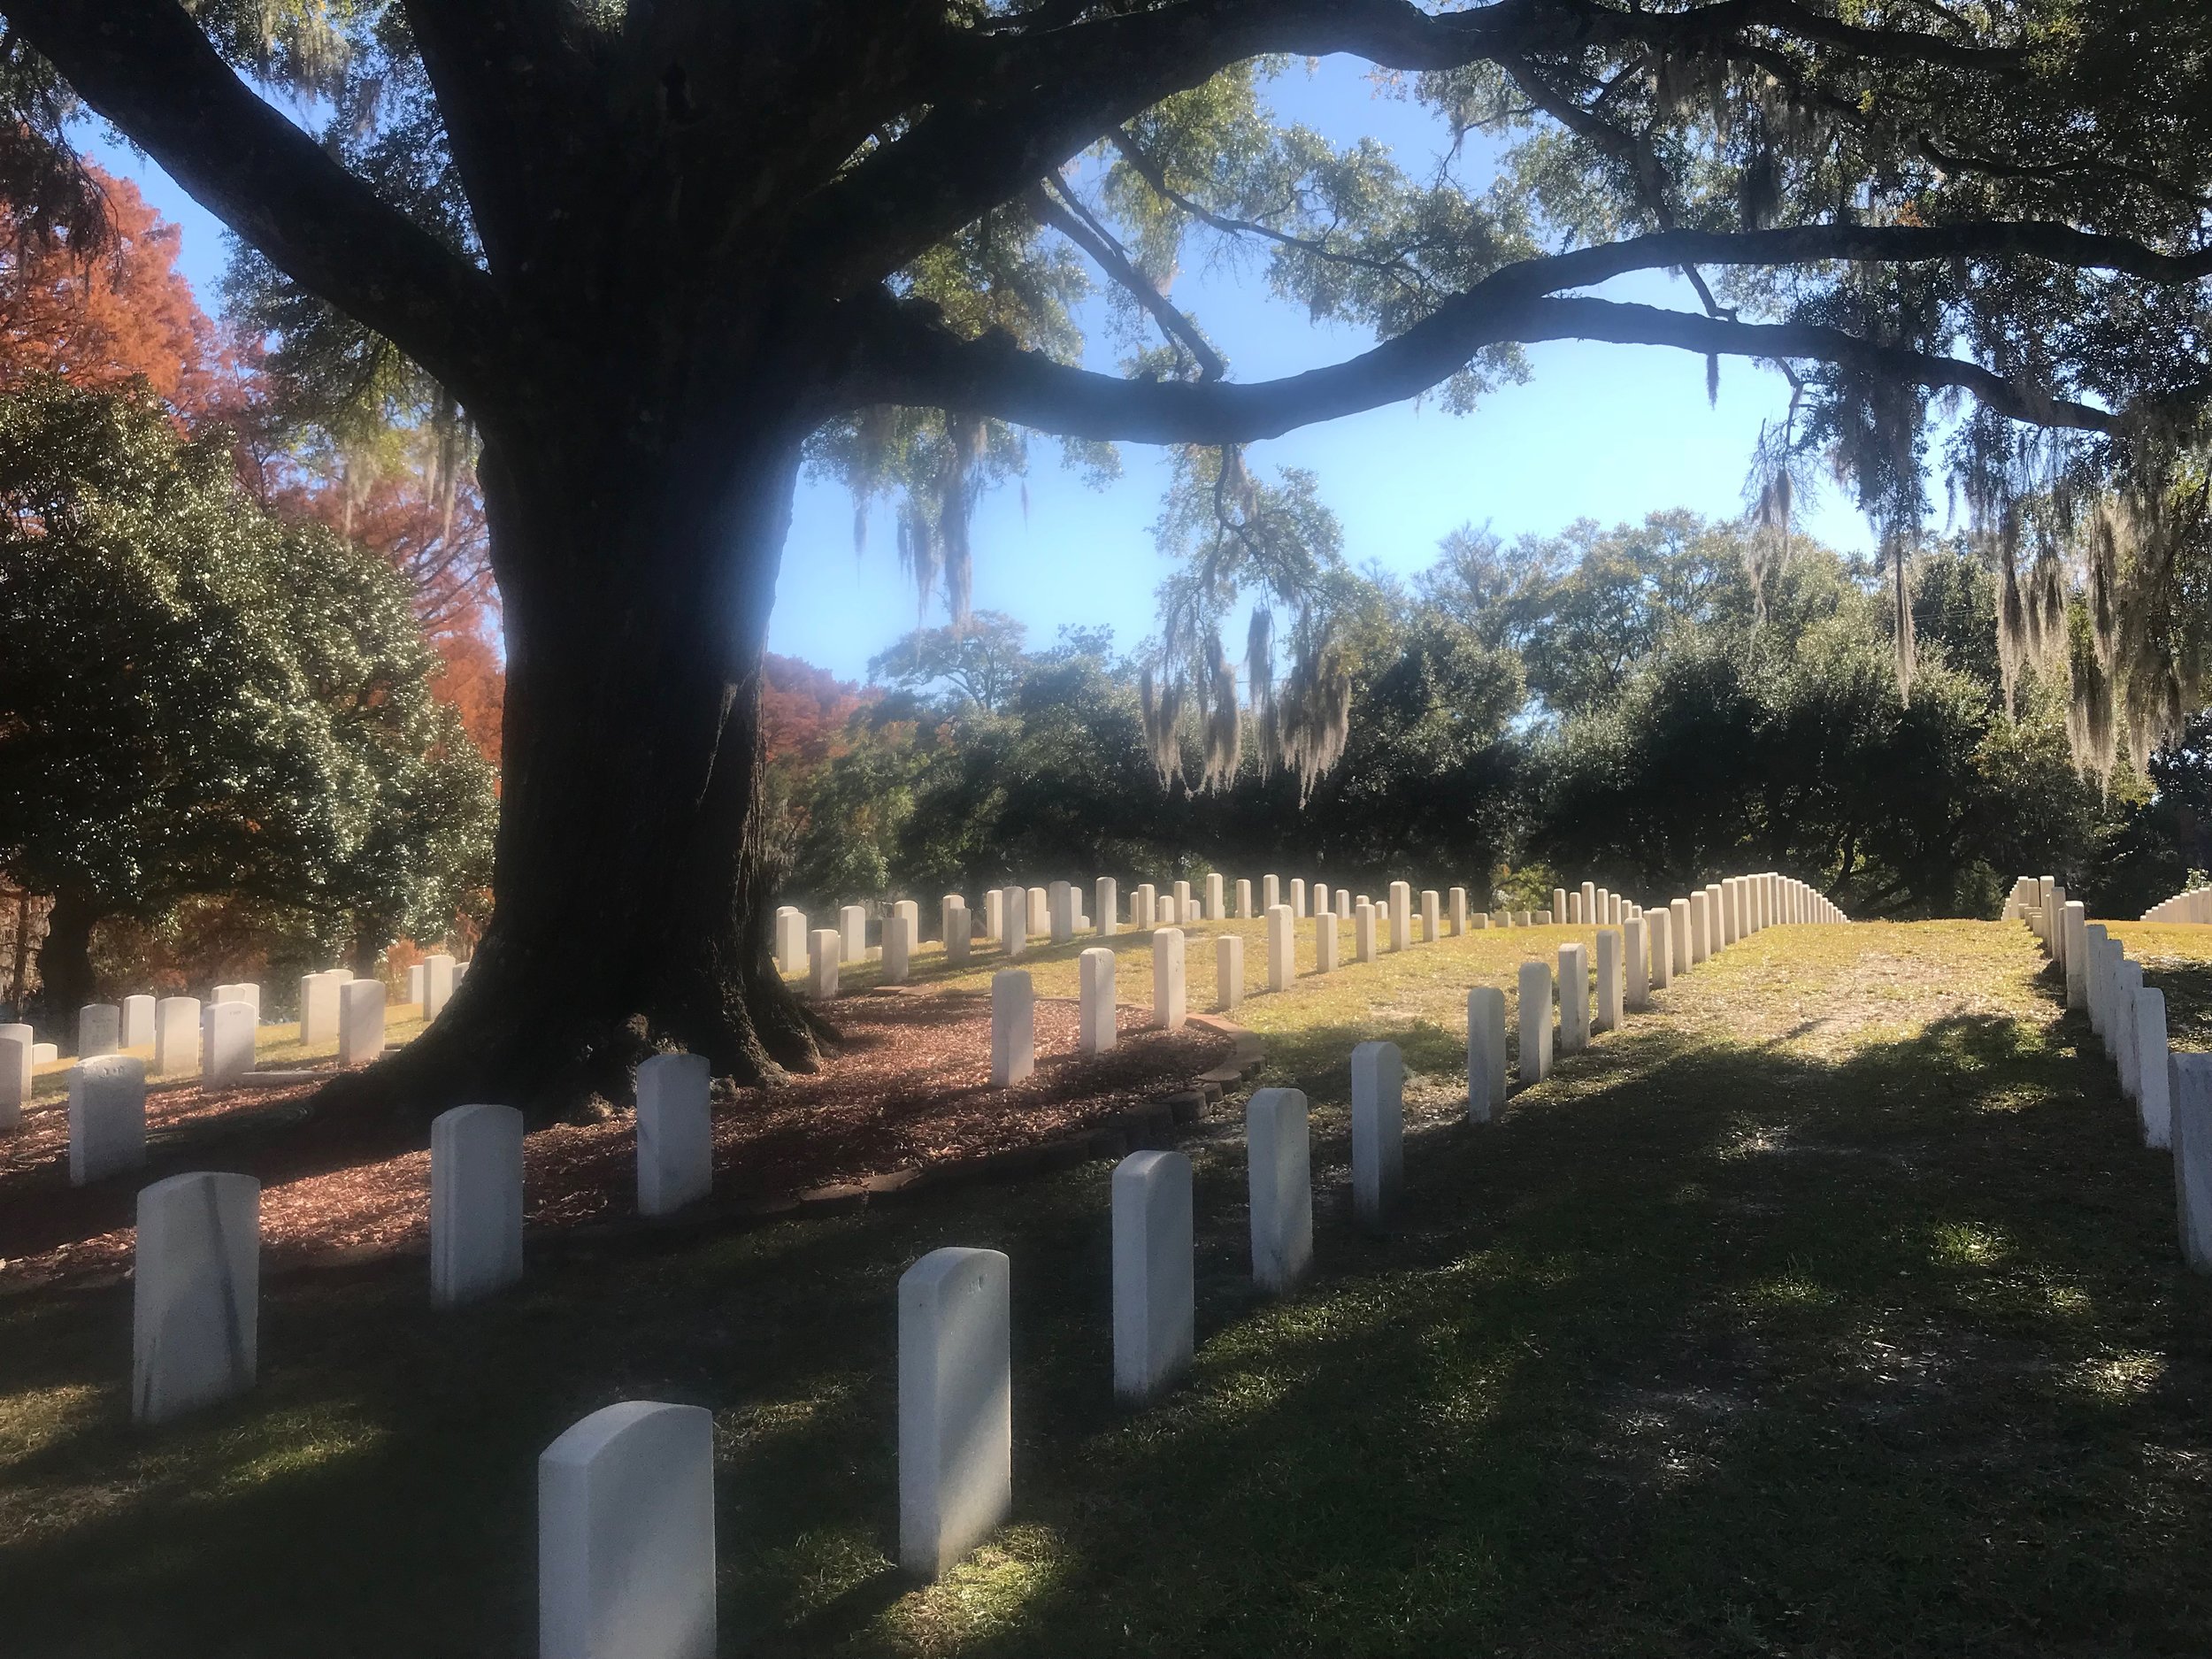  Wilmington National Cemetery has a section where more than 500 "colored troops" who fought for the Union are buried. 